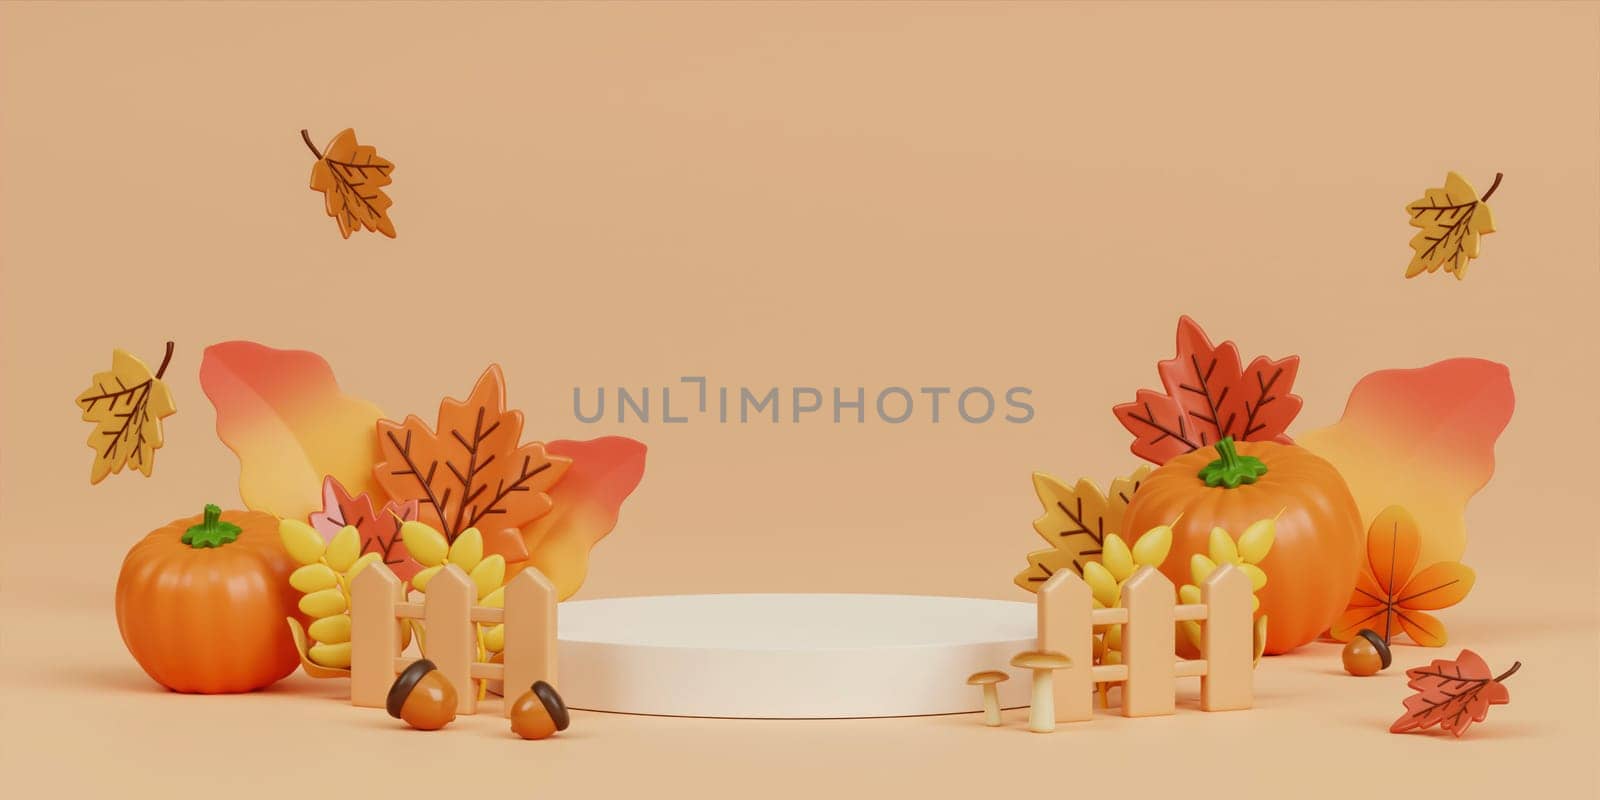 Autumn Display Podium Decoration Background with Autumn leaves and empty minimal podium pedestal product display. 3d render illustration. by meepiangraphic